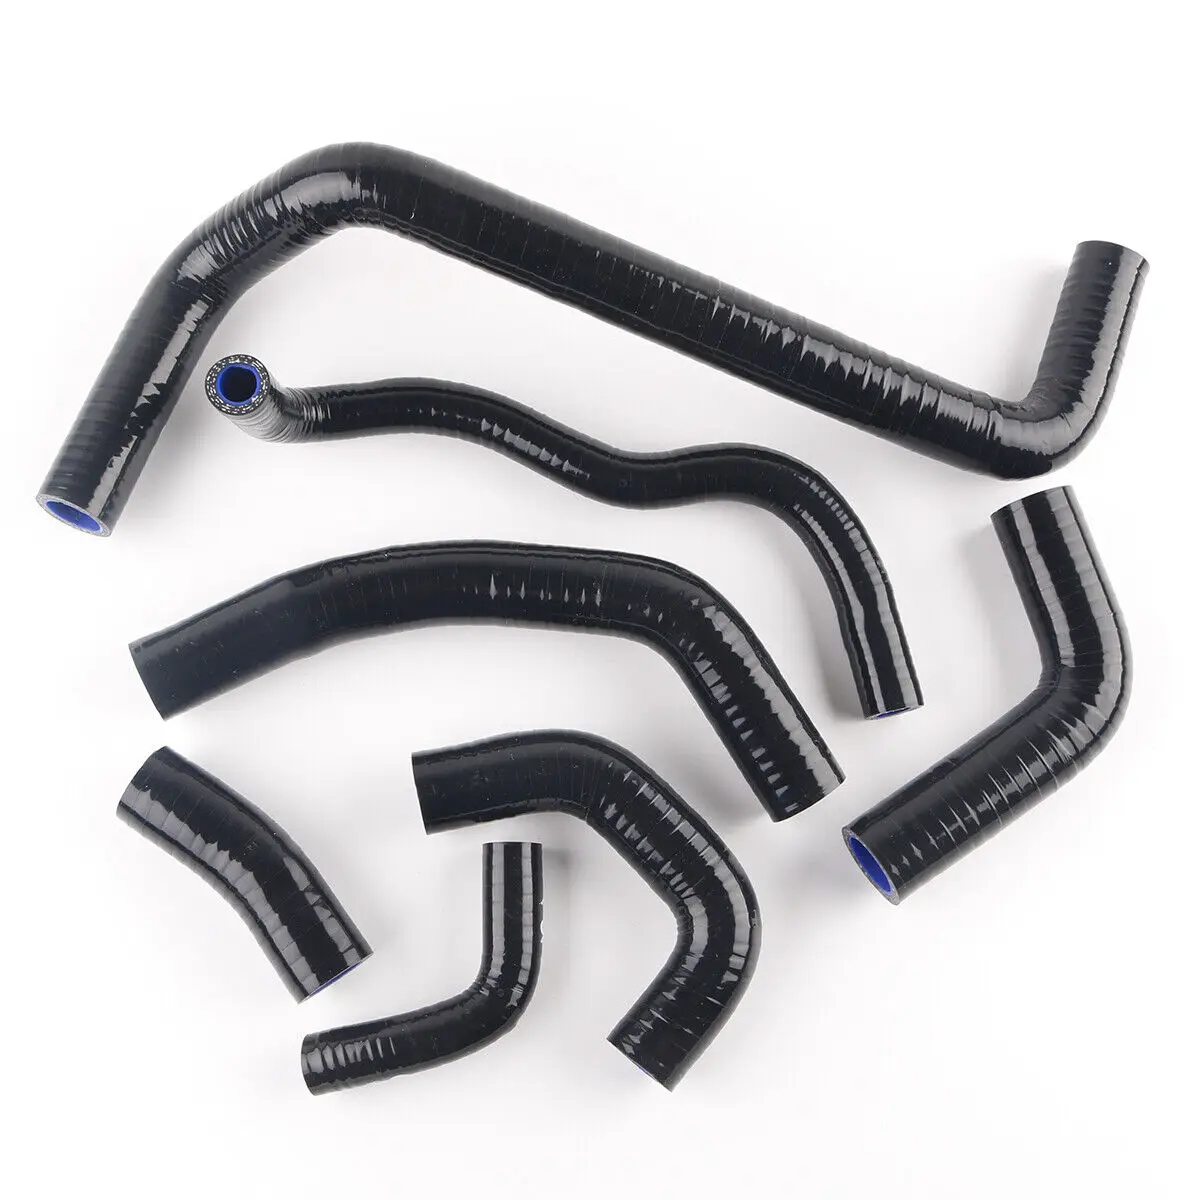 

7PCS FOR 2003-2004 HONDA CBR600RR CBR600 RR Motorcycle 3-ply Silicone Coolant Radiator Hose Kit Upper and Lower